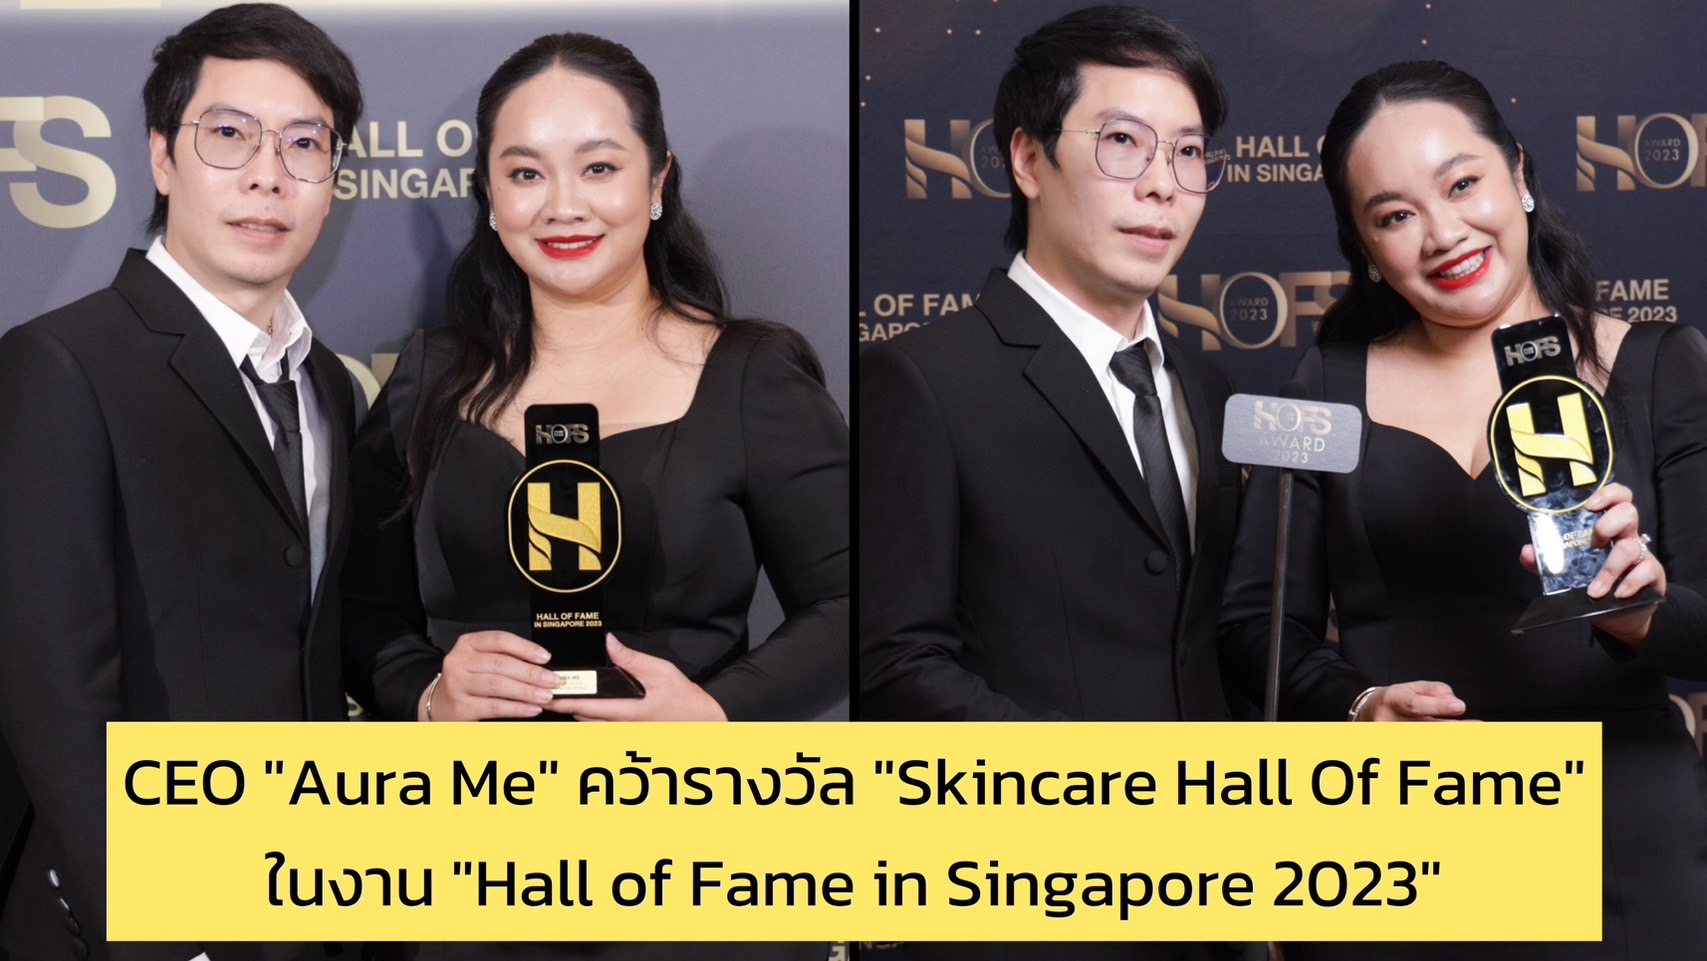 CEO “Aura Me” รับรางวัล “Skincare Hall Of Fame” ในงาน “Hall of Fame in Singapore 2023”